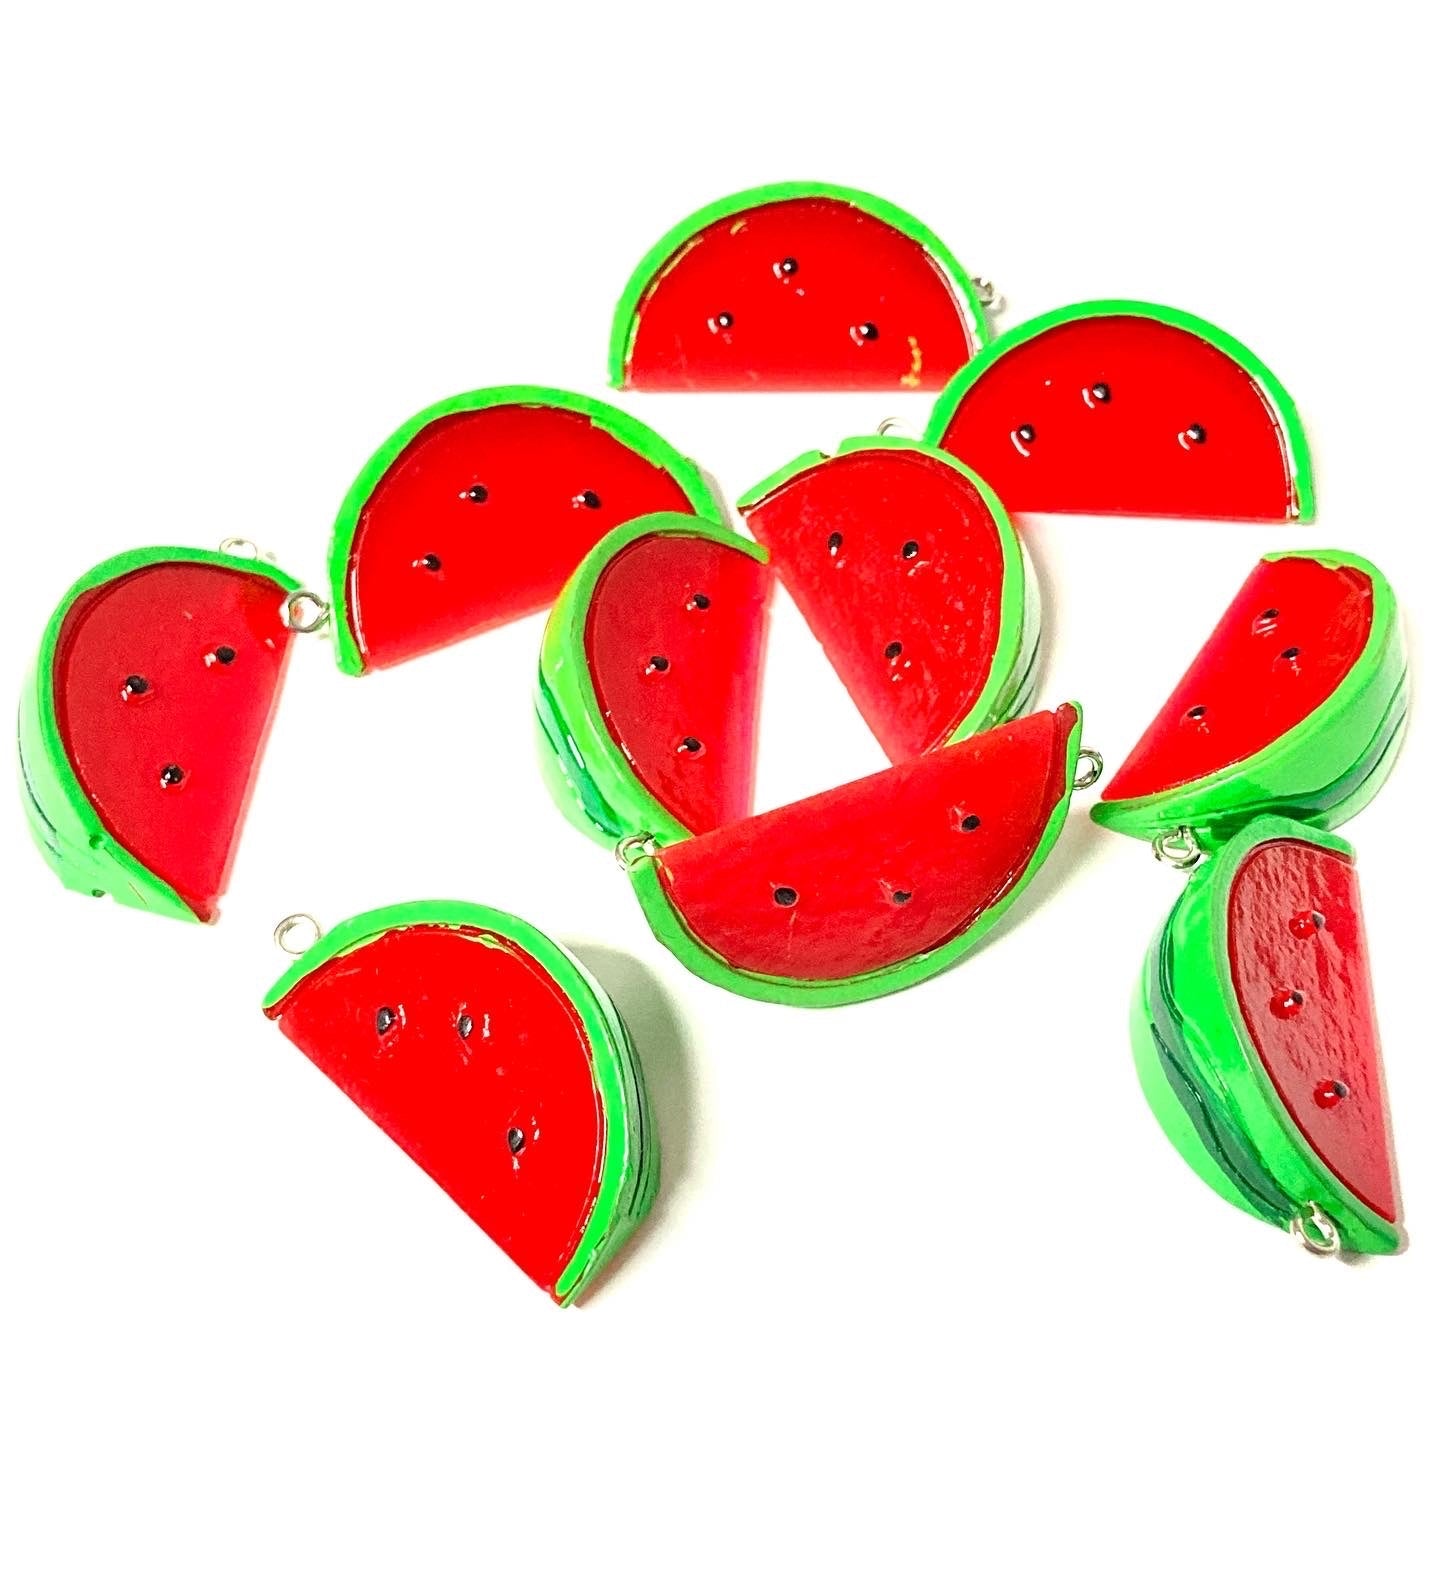 Watermelon Charms and Pendants